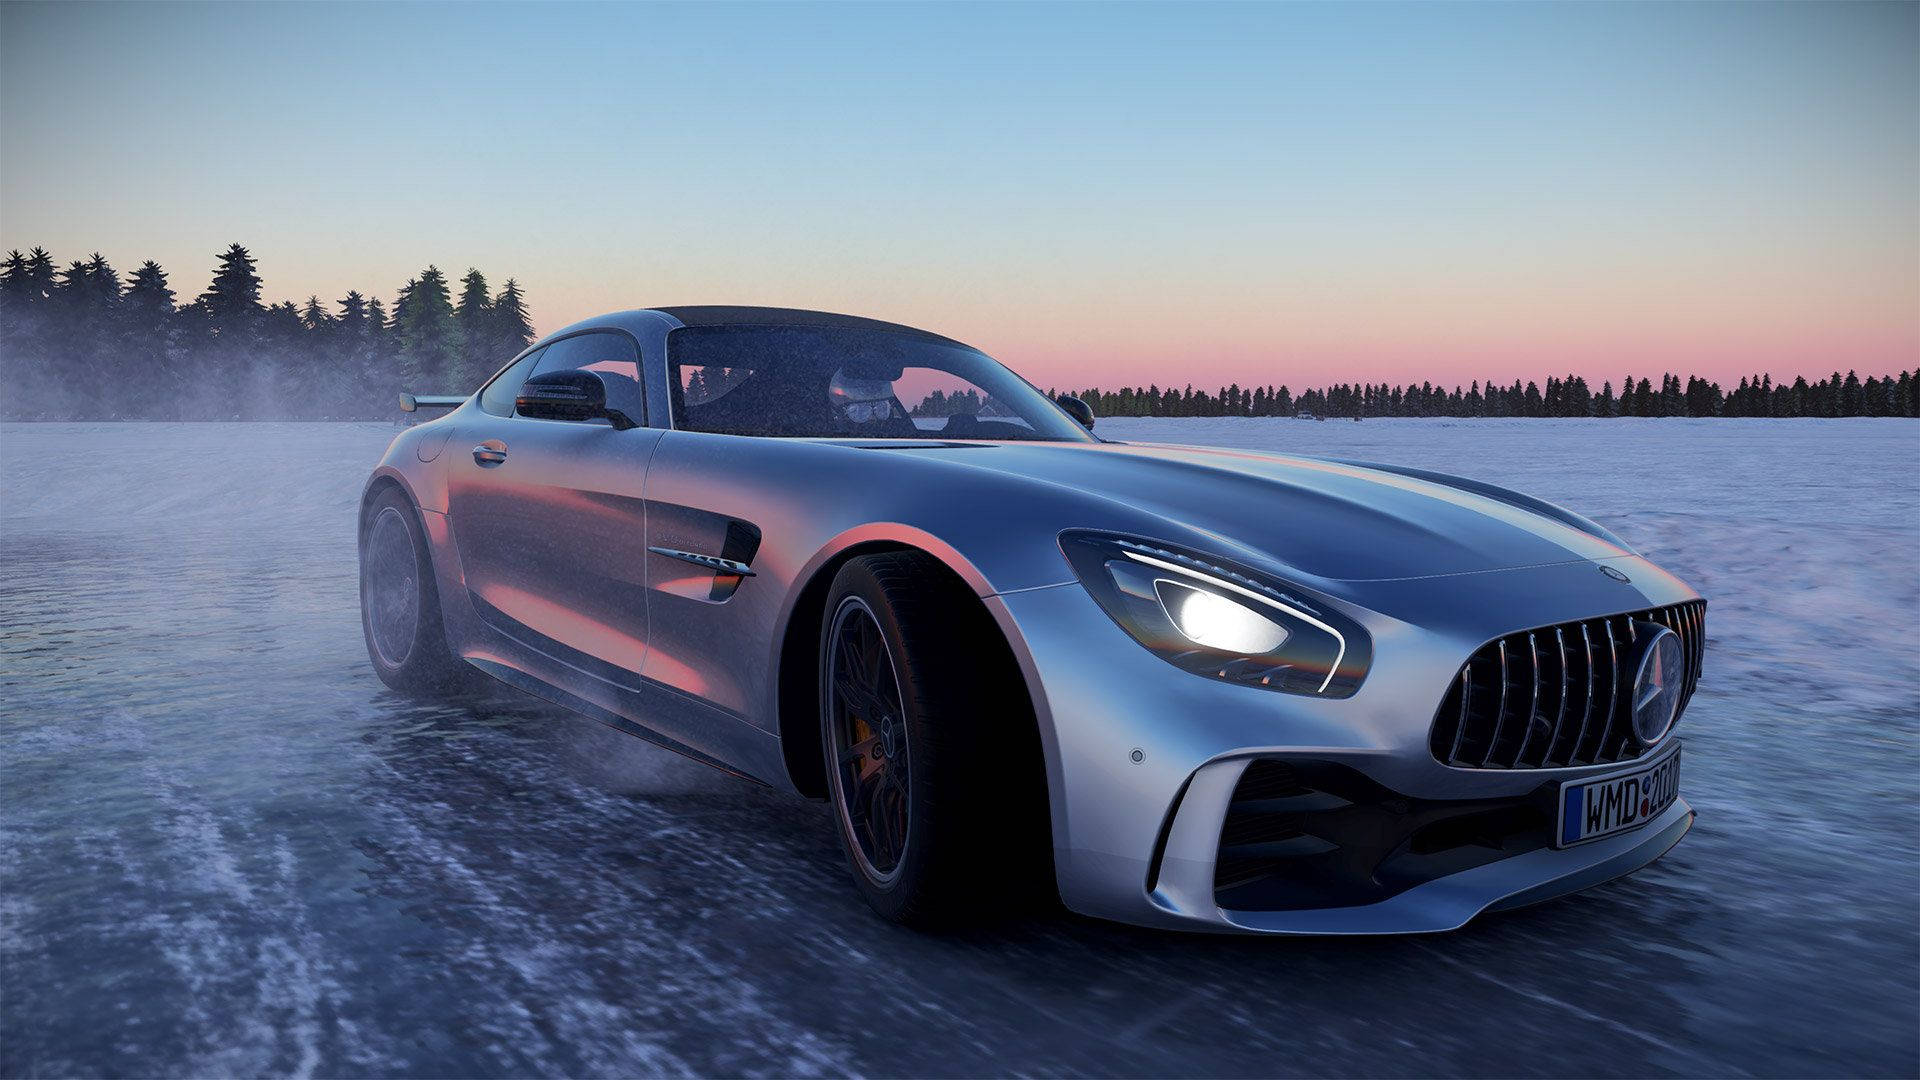 Titanium Mercedes-benz In Action - Project Cars 2